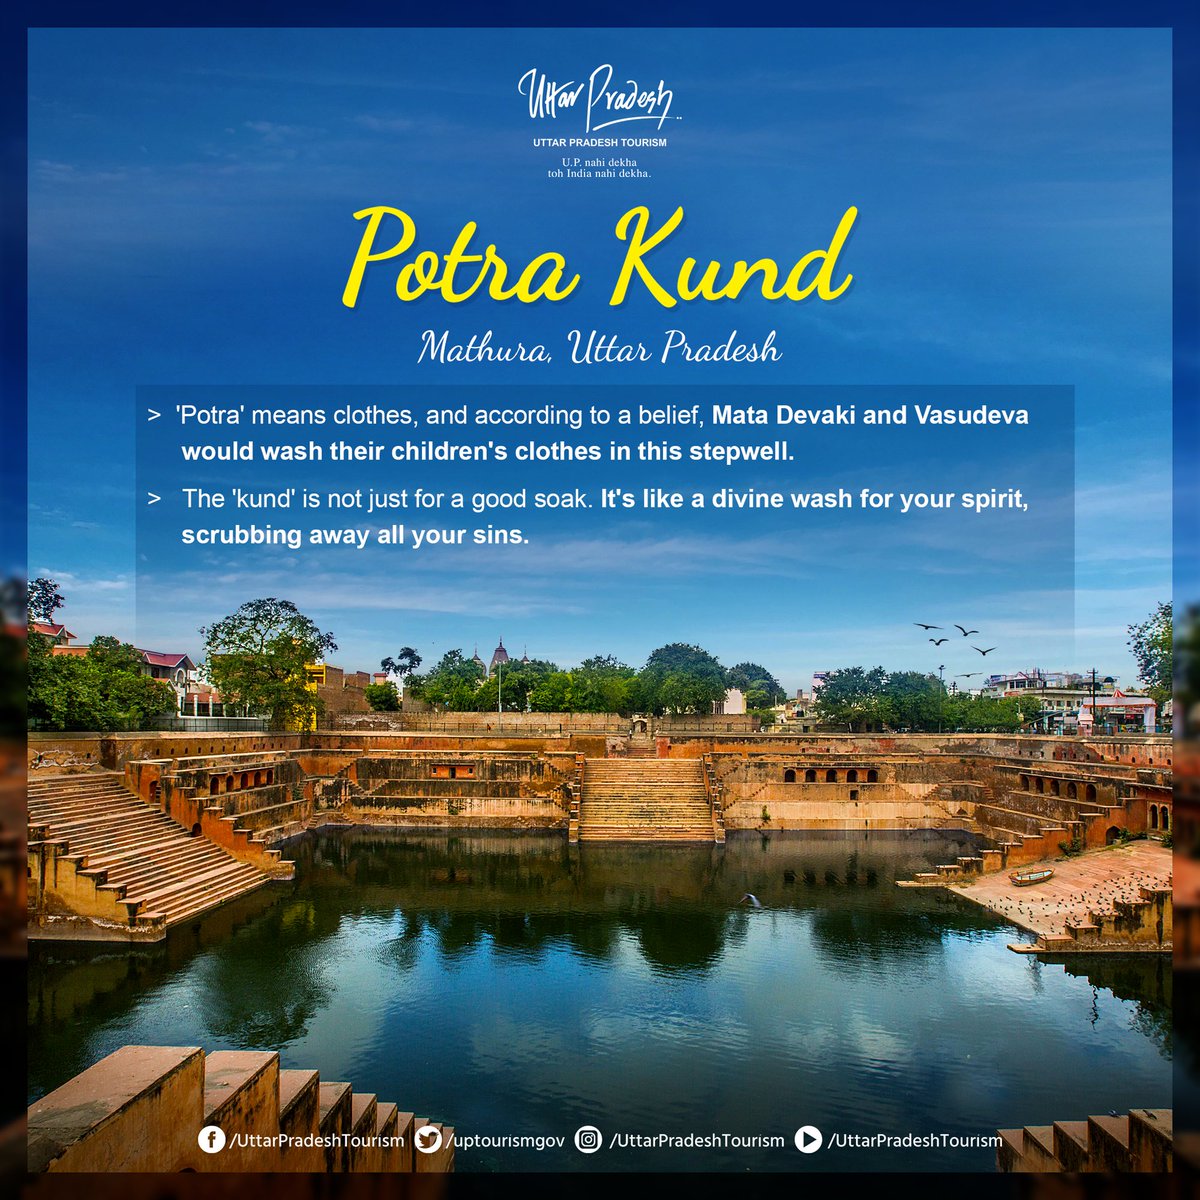 #PotraKund, a serene structure in #Mathura, holds a fascinating legend. 'Potra,' meaning clothes, is where Mata Devaki and Vasudeva would wash their children's garments. This stepwell, or 'kund,' is believed to cleanse the spirit and absolve sins. #MathuraVrindavan #UttarPradesh